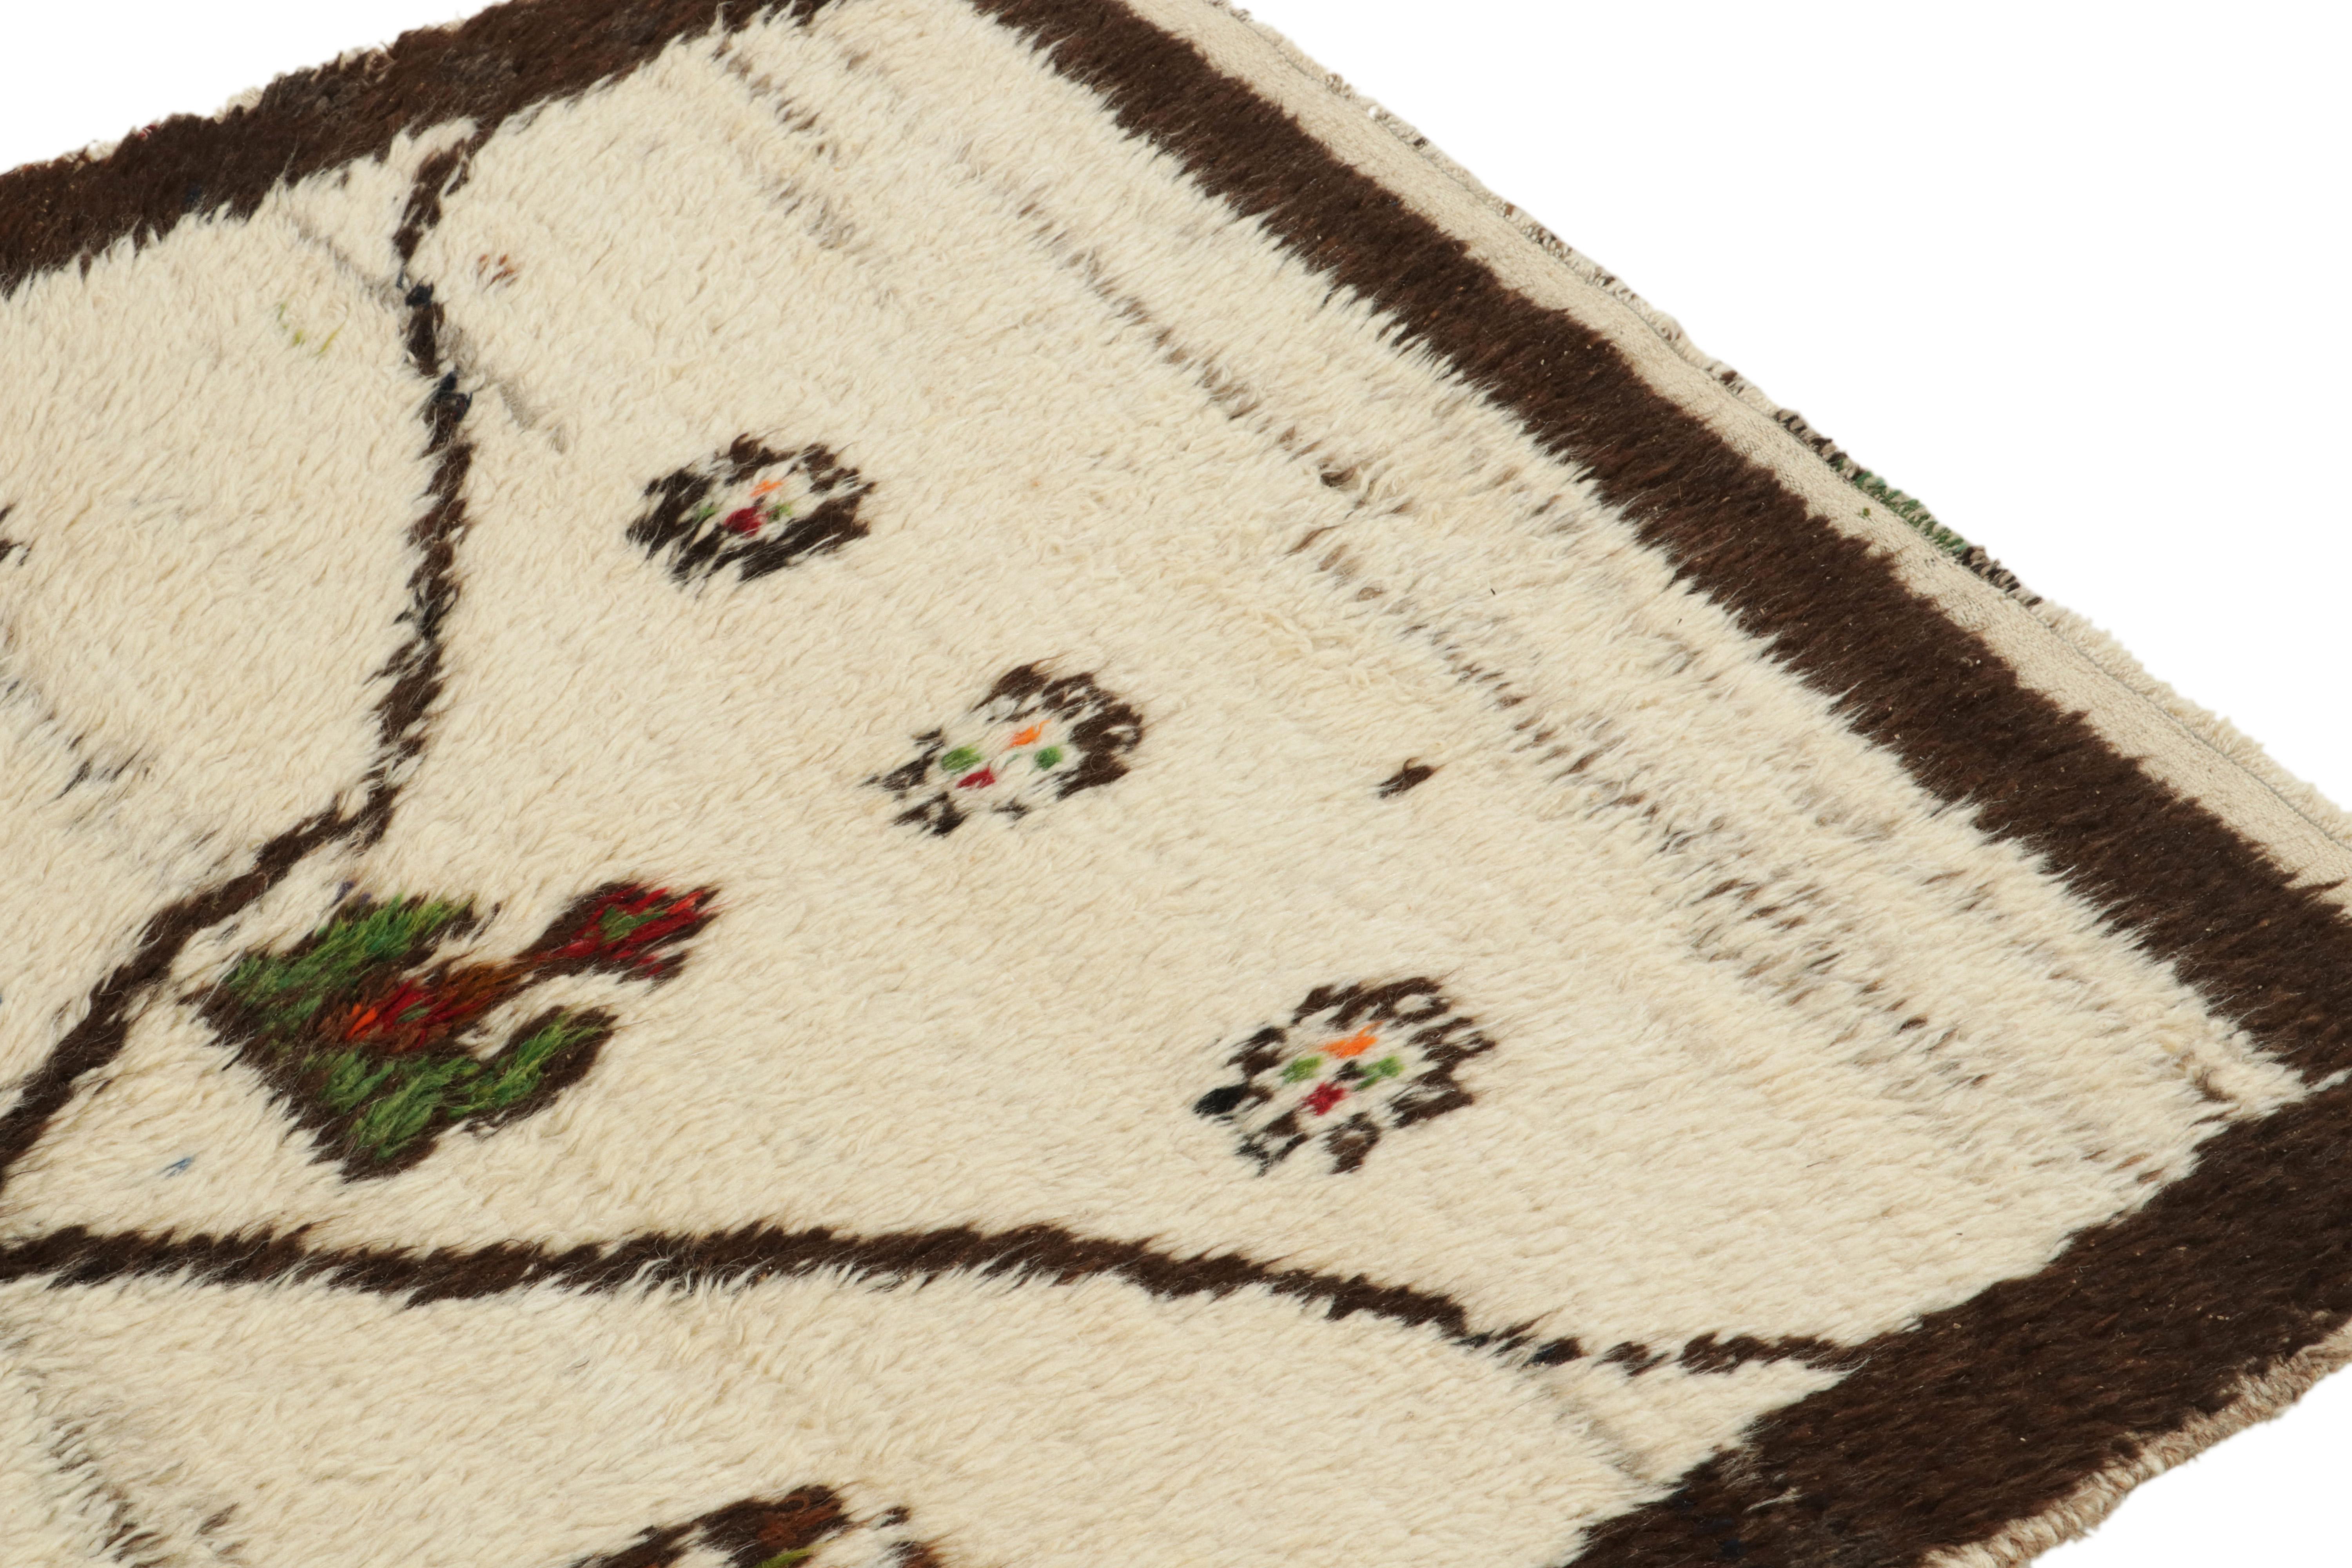 Turkish Vintage Tulu Shag Rug In White With Brown Geometric Patterns By Rug & Kilim For Sale